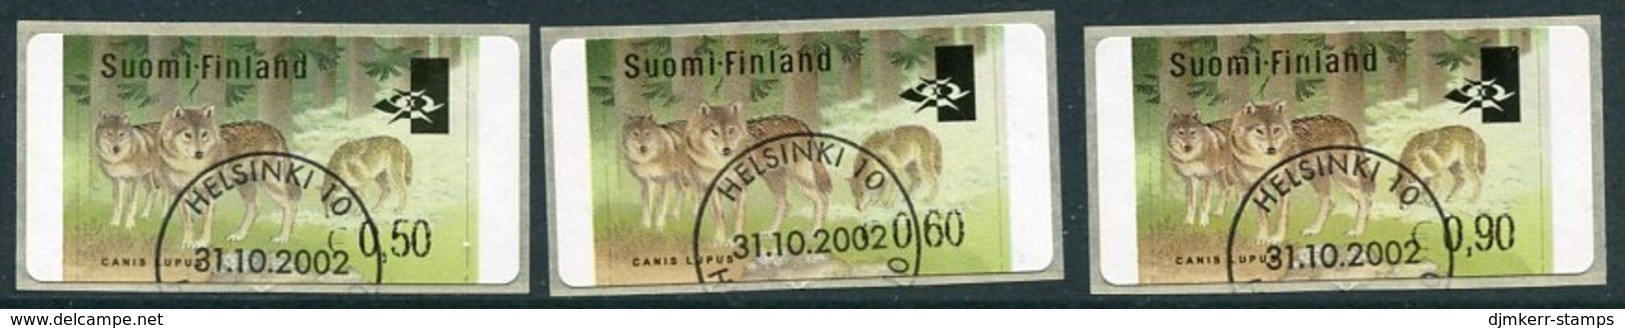 FINLAND 2002 Wolves ATM, Three Values Used.  Michel 38 - Automaatzegels [ATM]